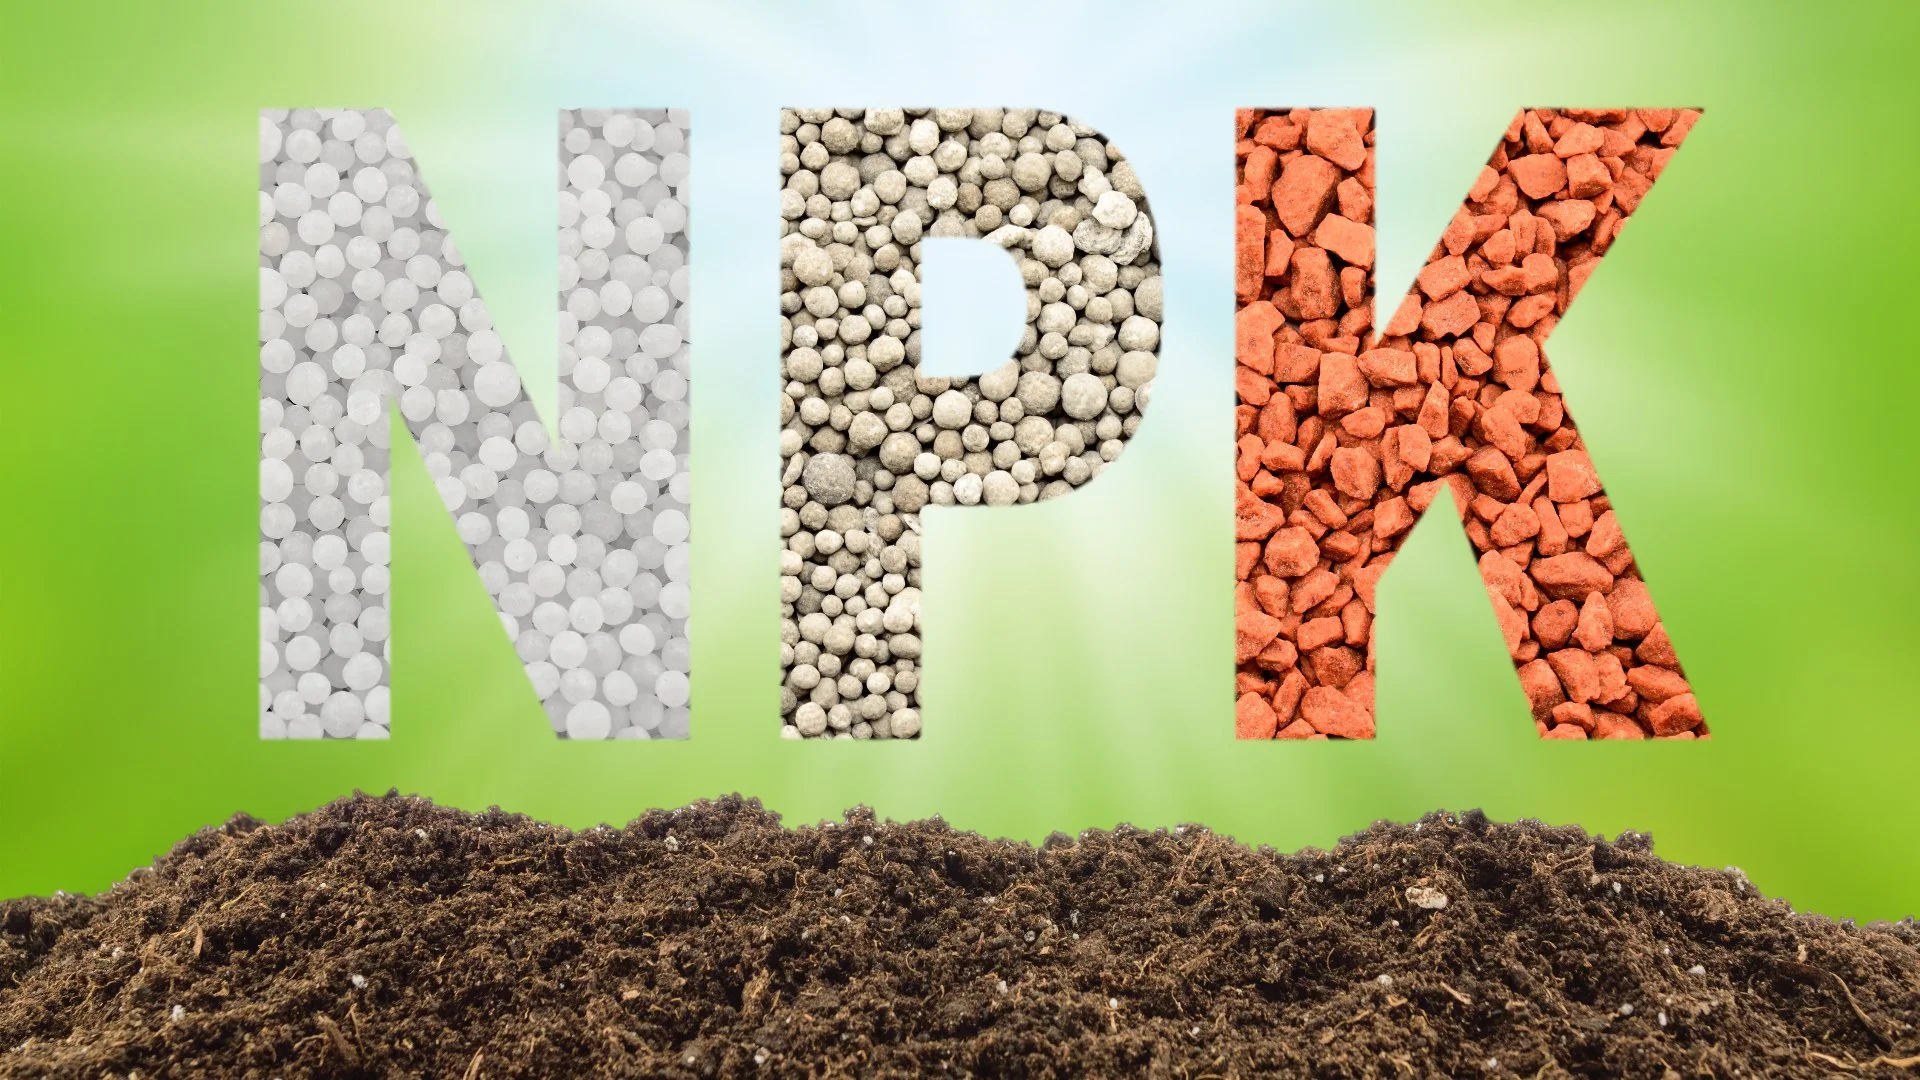 NPK - What It Stands for & Why These Nutrients Are in Lawn Fertilizers